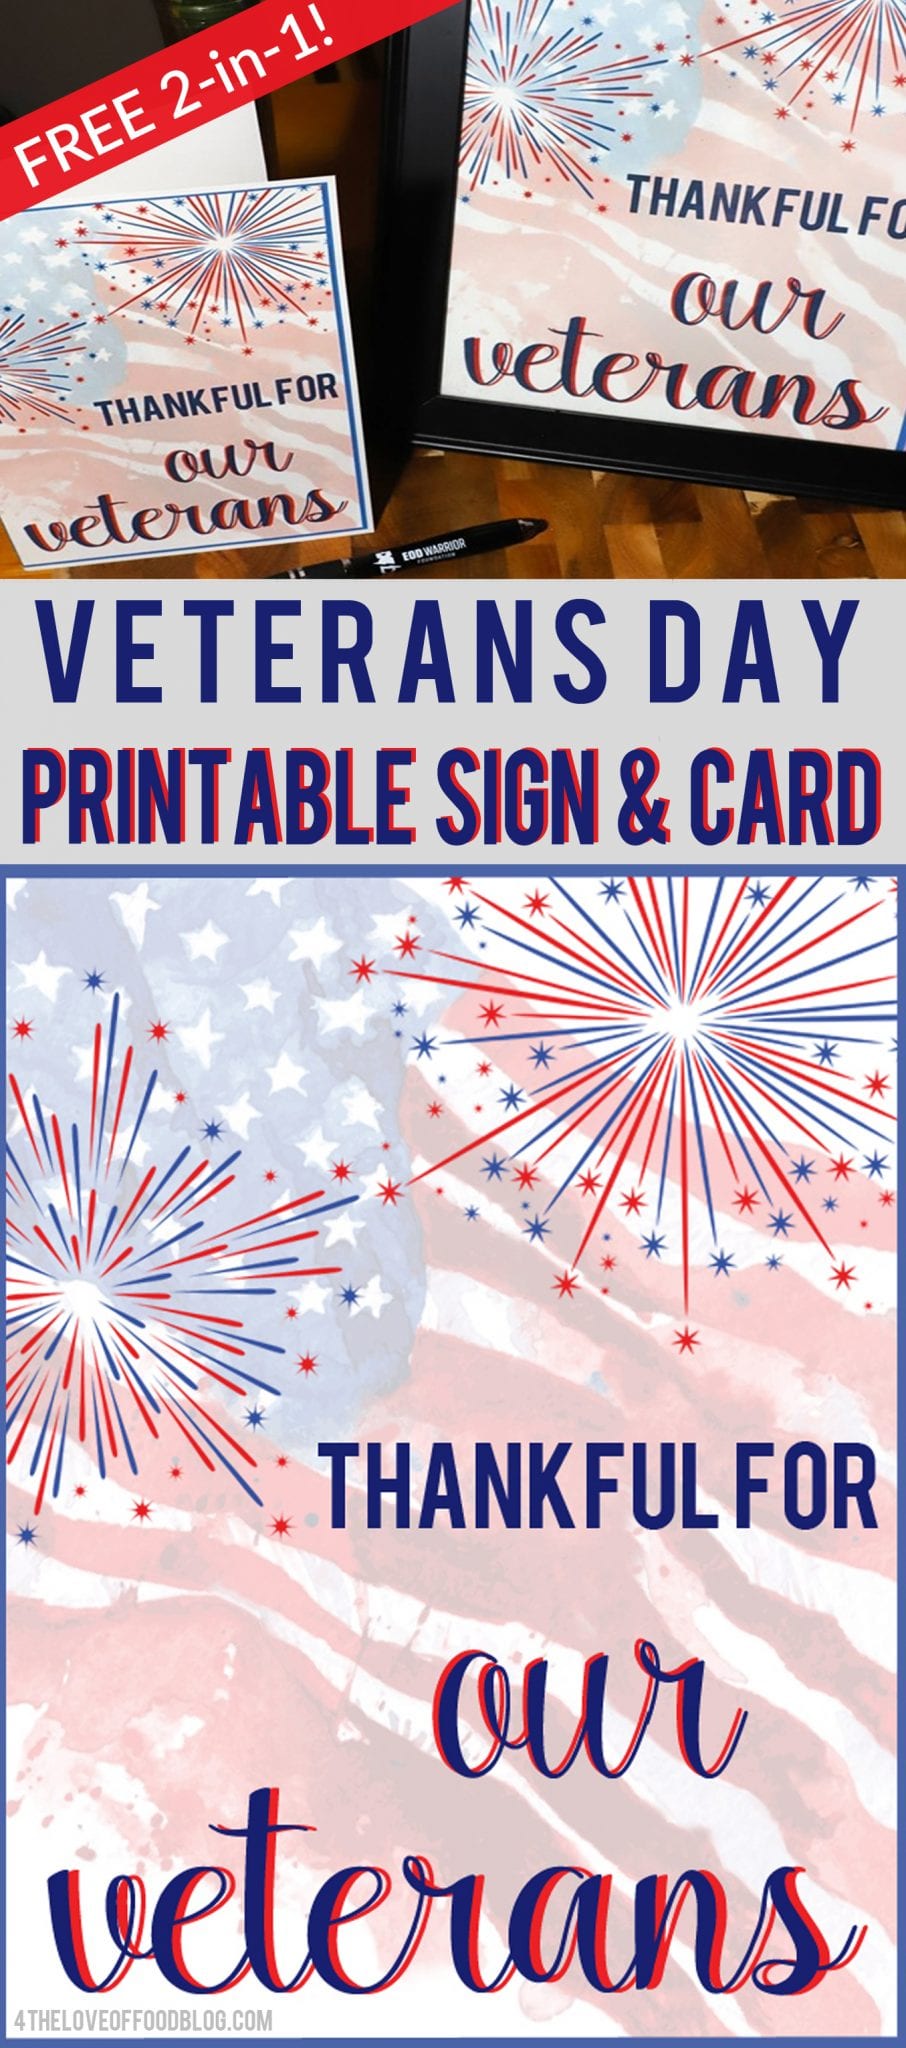 Veterans Day Printable Sign and Card For the Love of Food